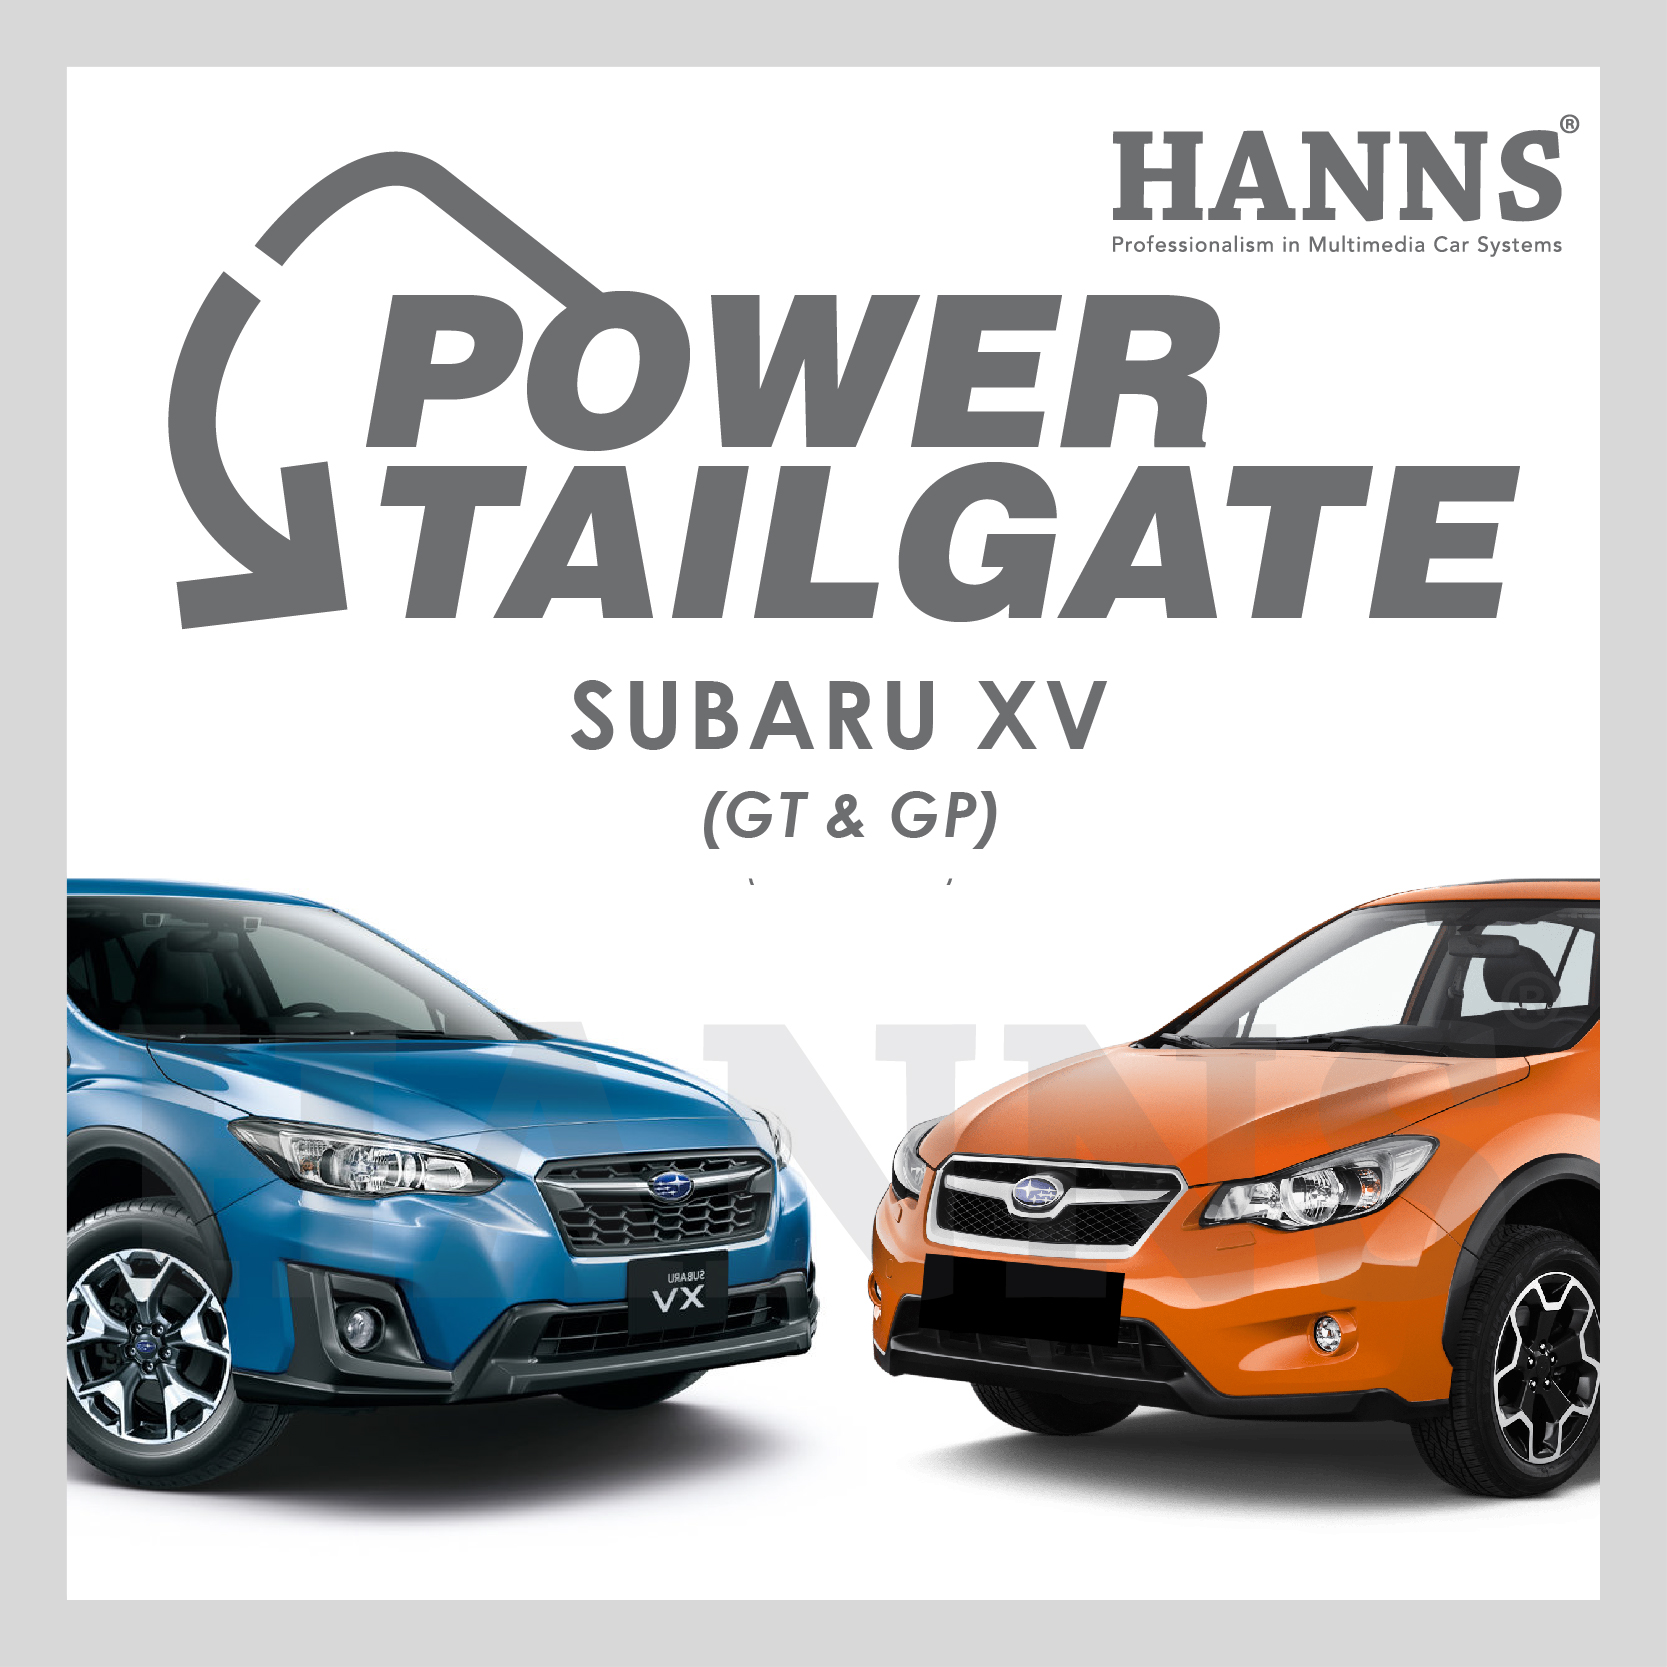 The Best Power Tailgate For Subaru Xv In Malaysia